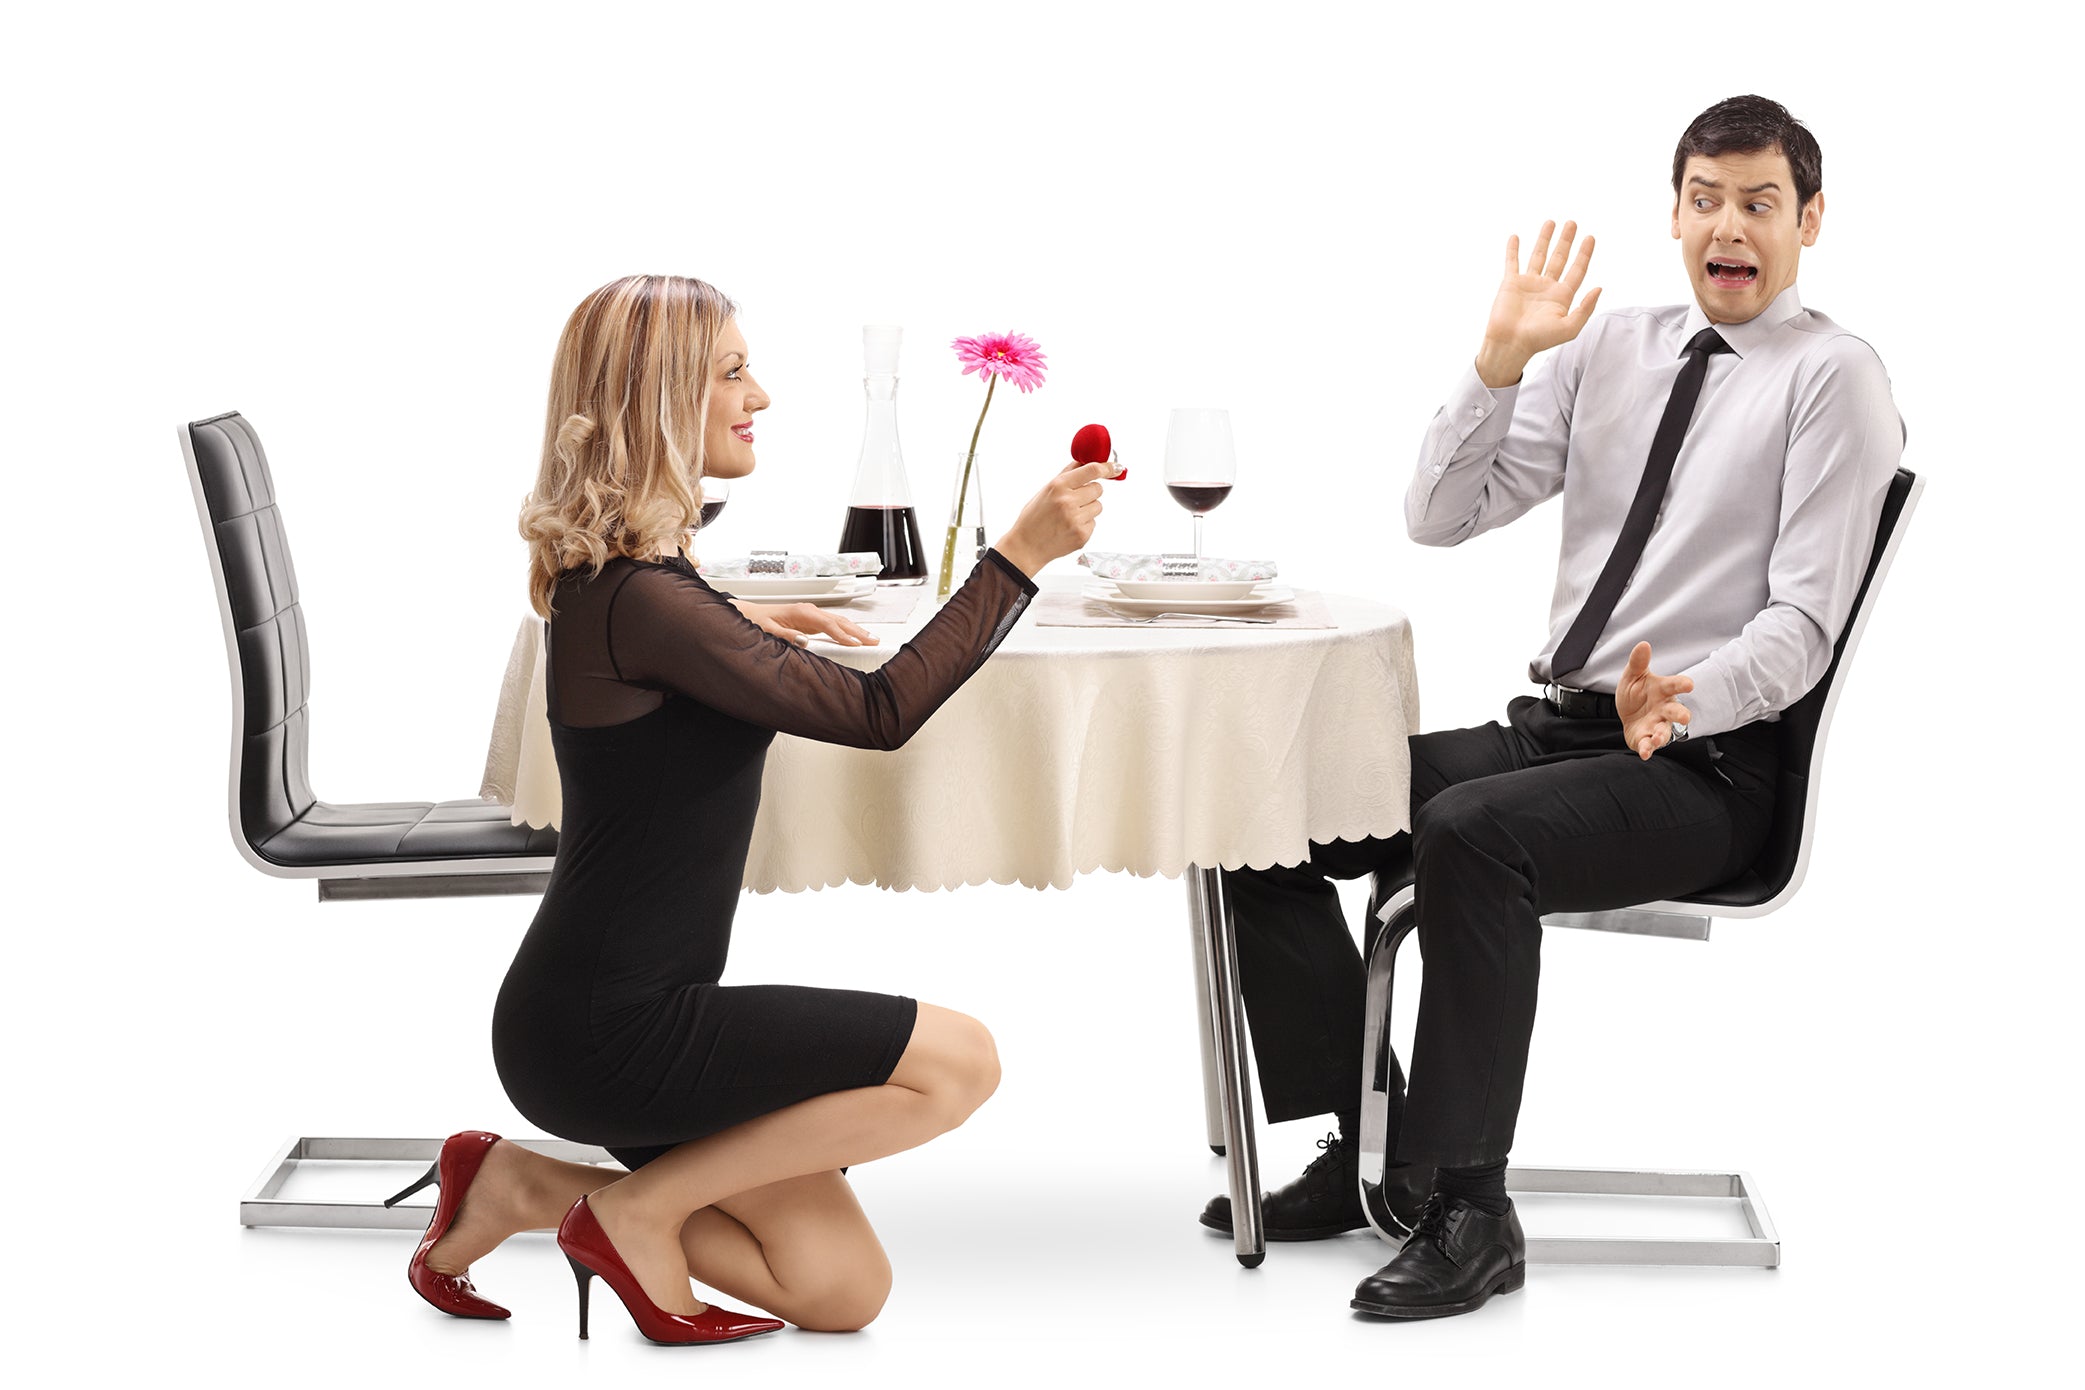 Building Customer Relationships: Why You Can't Go Straight to Marriage